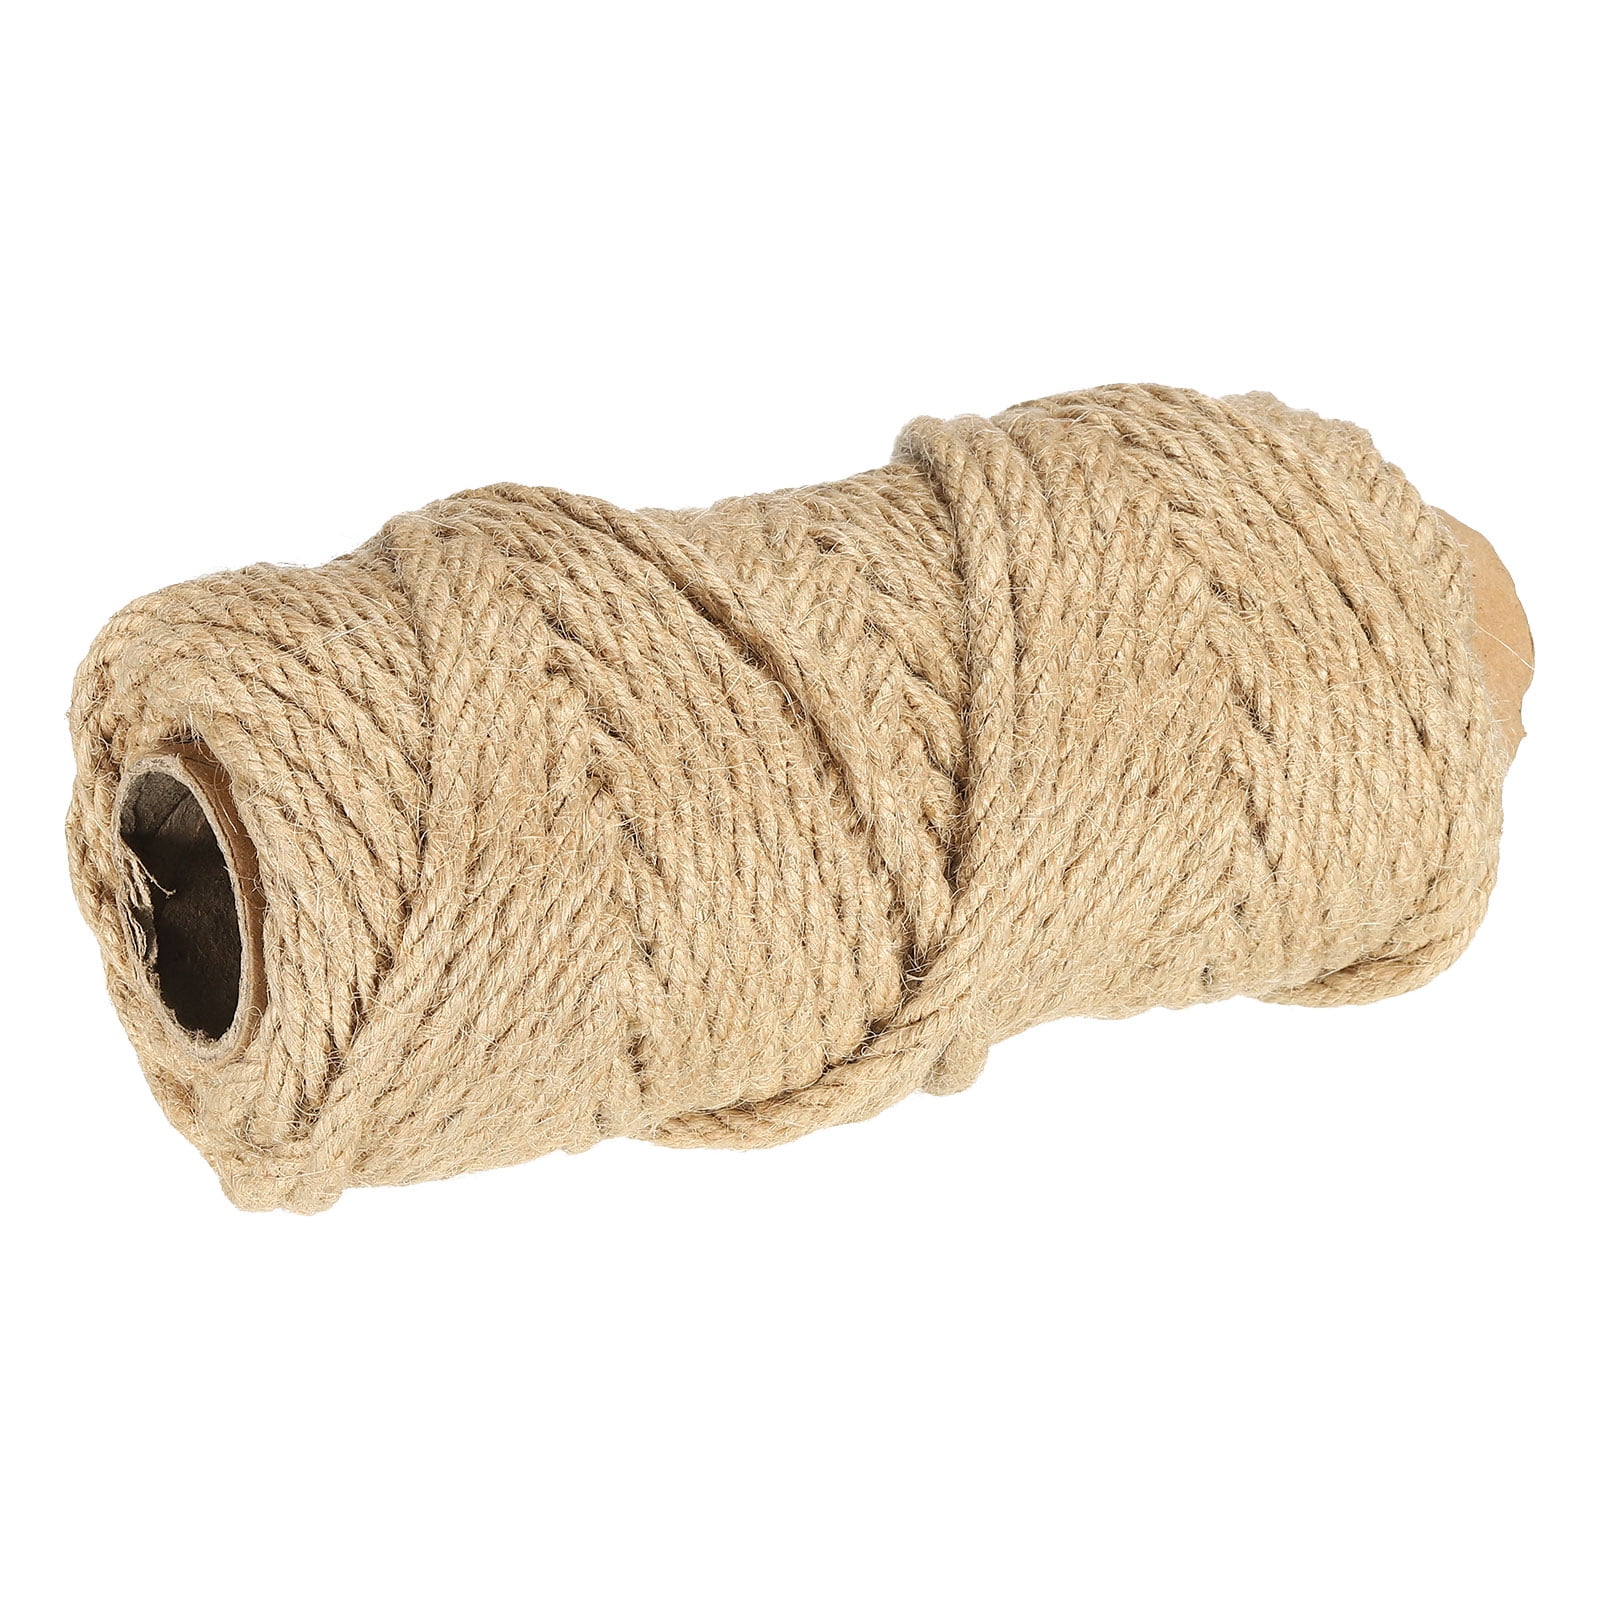 Uxcell Jute Twine 6mm, 82 Feet Long Brown Twine Rope for DIY